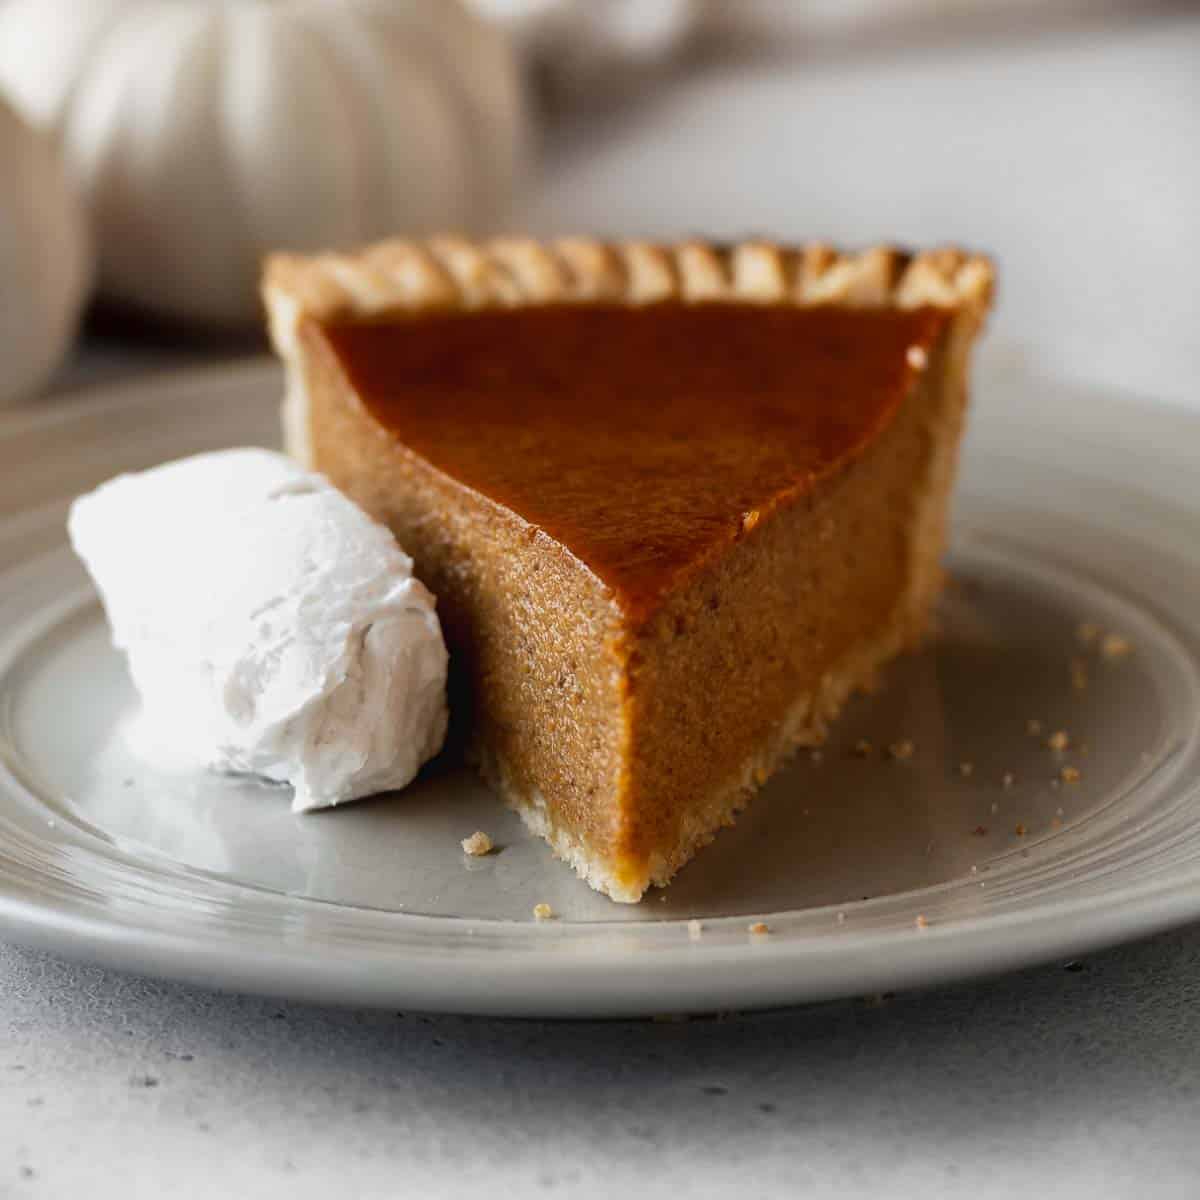 A slice of dairy-free pumpkin pie on a grey plate with a whipped coconut cream on the side.